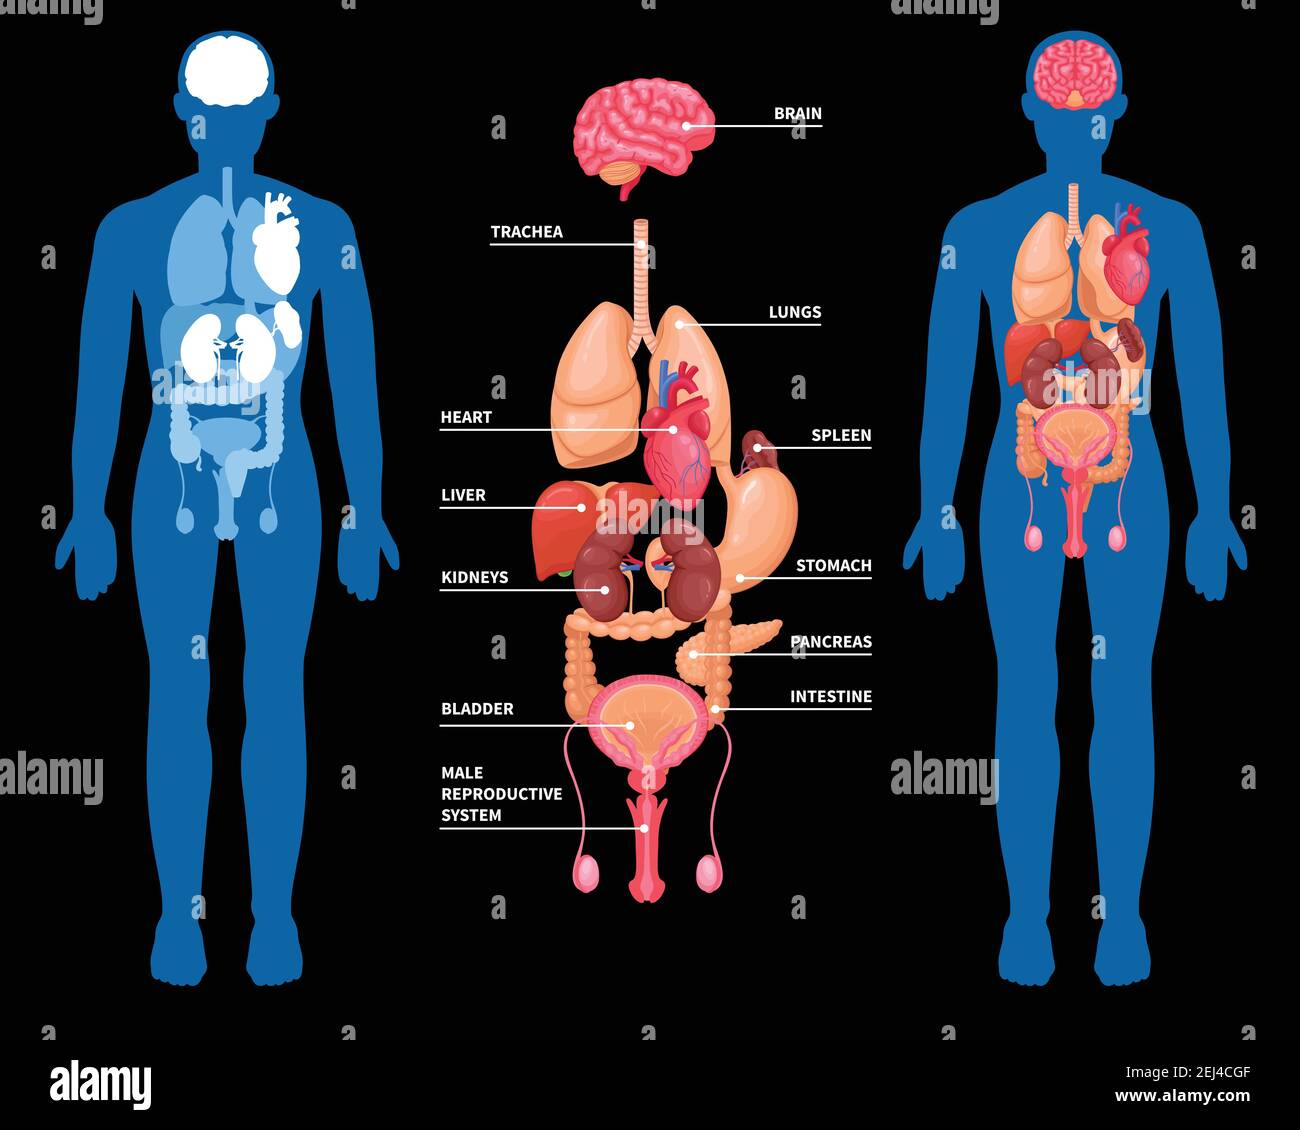 Human anatomy layout of internal organs in male body isolated on black background vector illustration Stock Vector